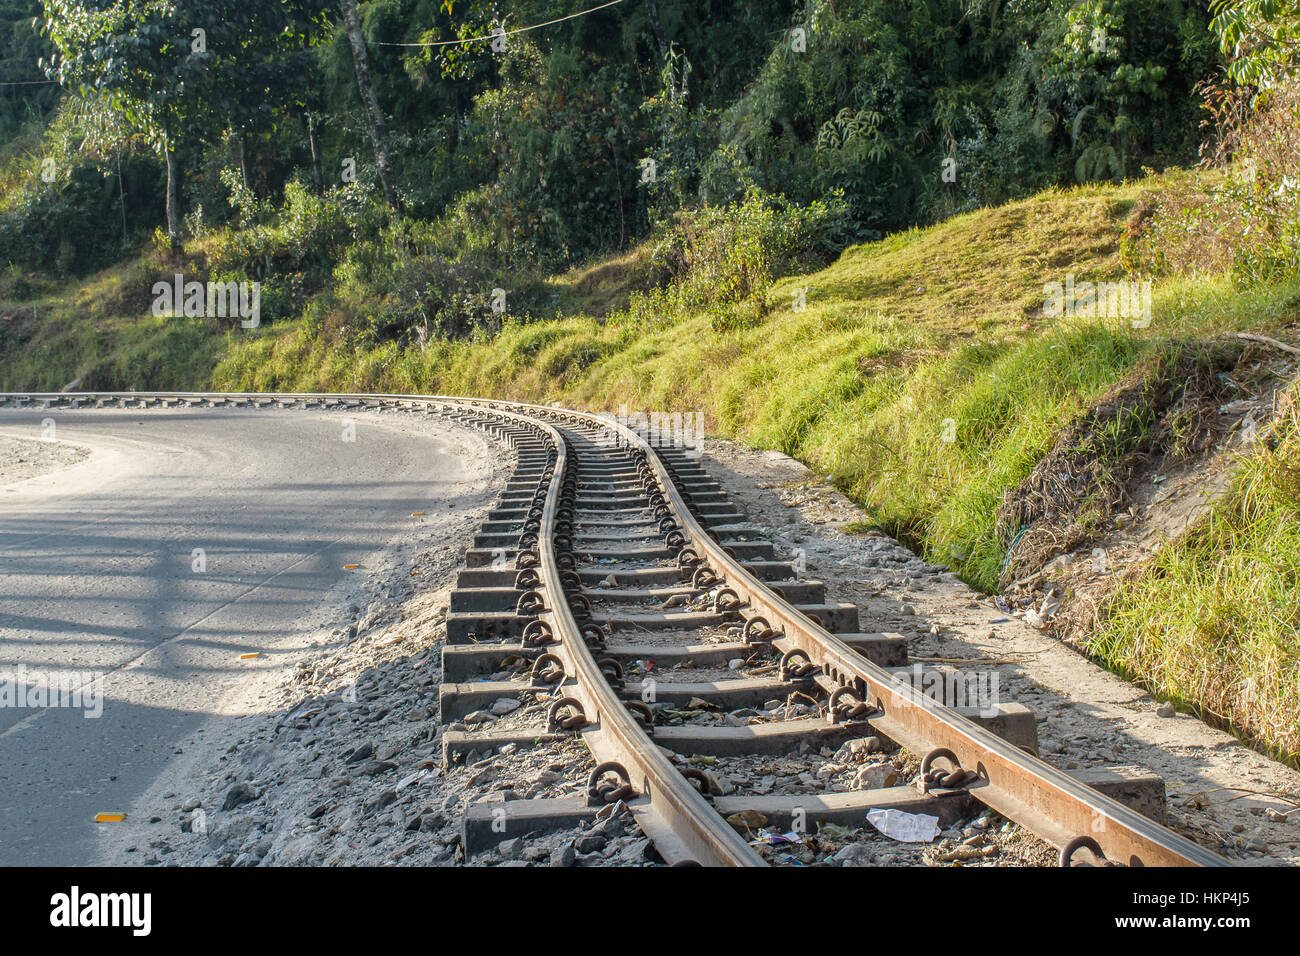 The 2 ft narrow gauge line of Darjeeling Toy train, that runs between New Jalpaiguri and Darjeeling in the Indian state of West Bengal, India. Stock Photo